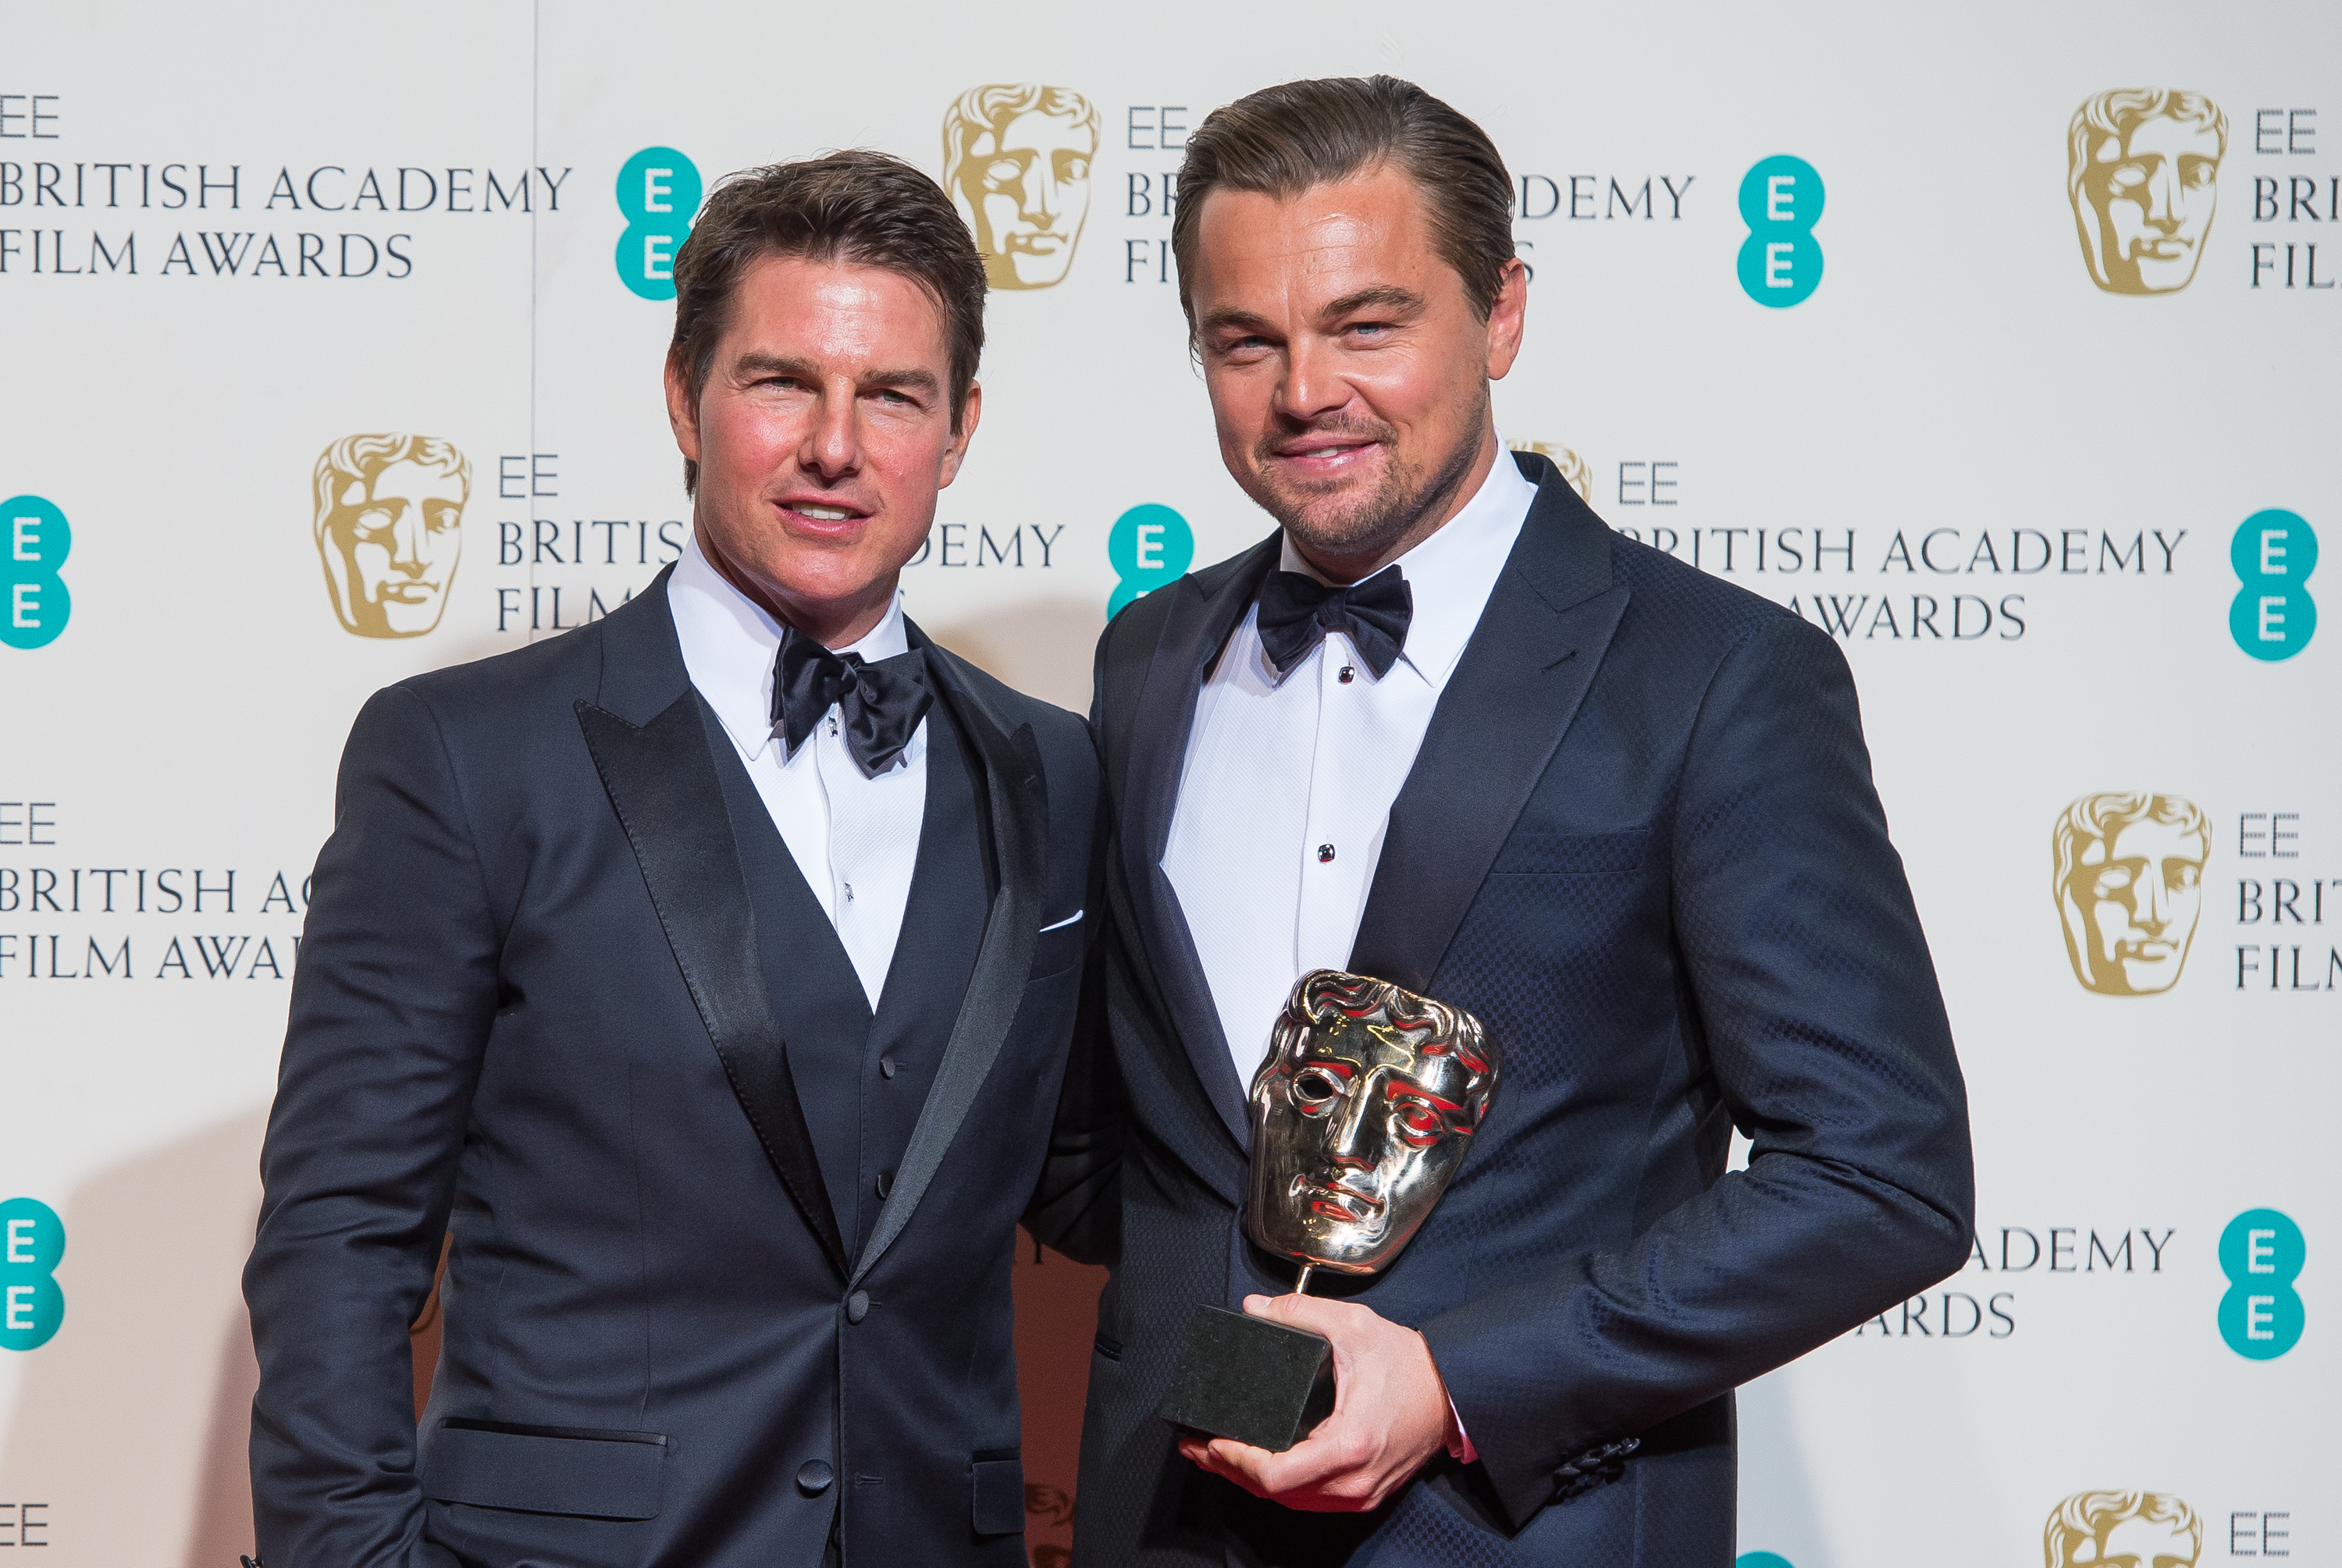 Tom Cruise and Leonardo DiCaprio at the EE British Academy Film Awards on February 14, 2016 in London, England | Source: Getty Images